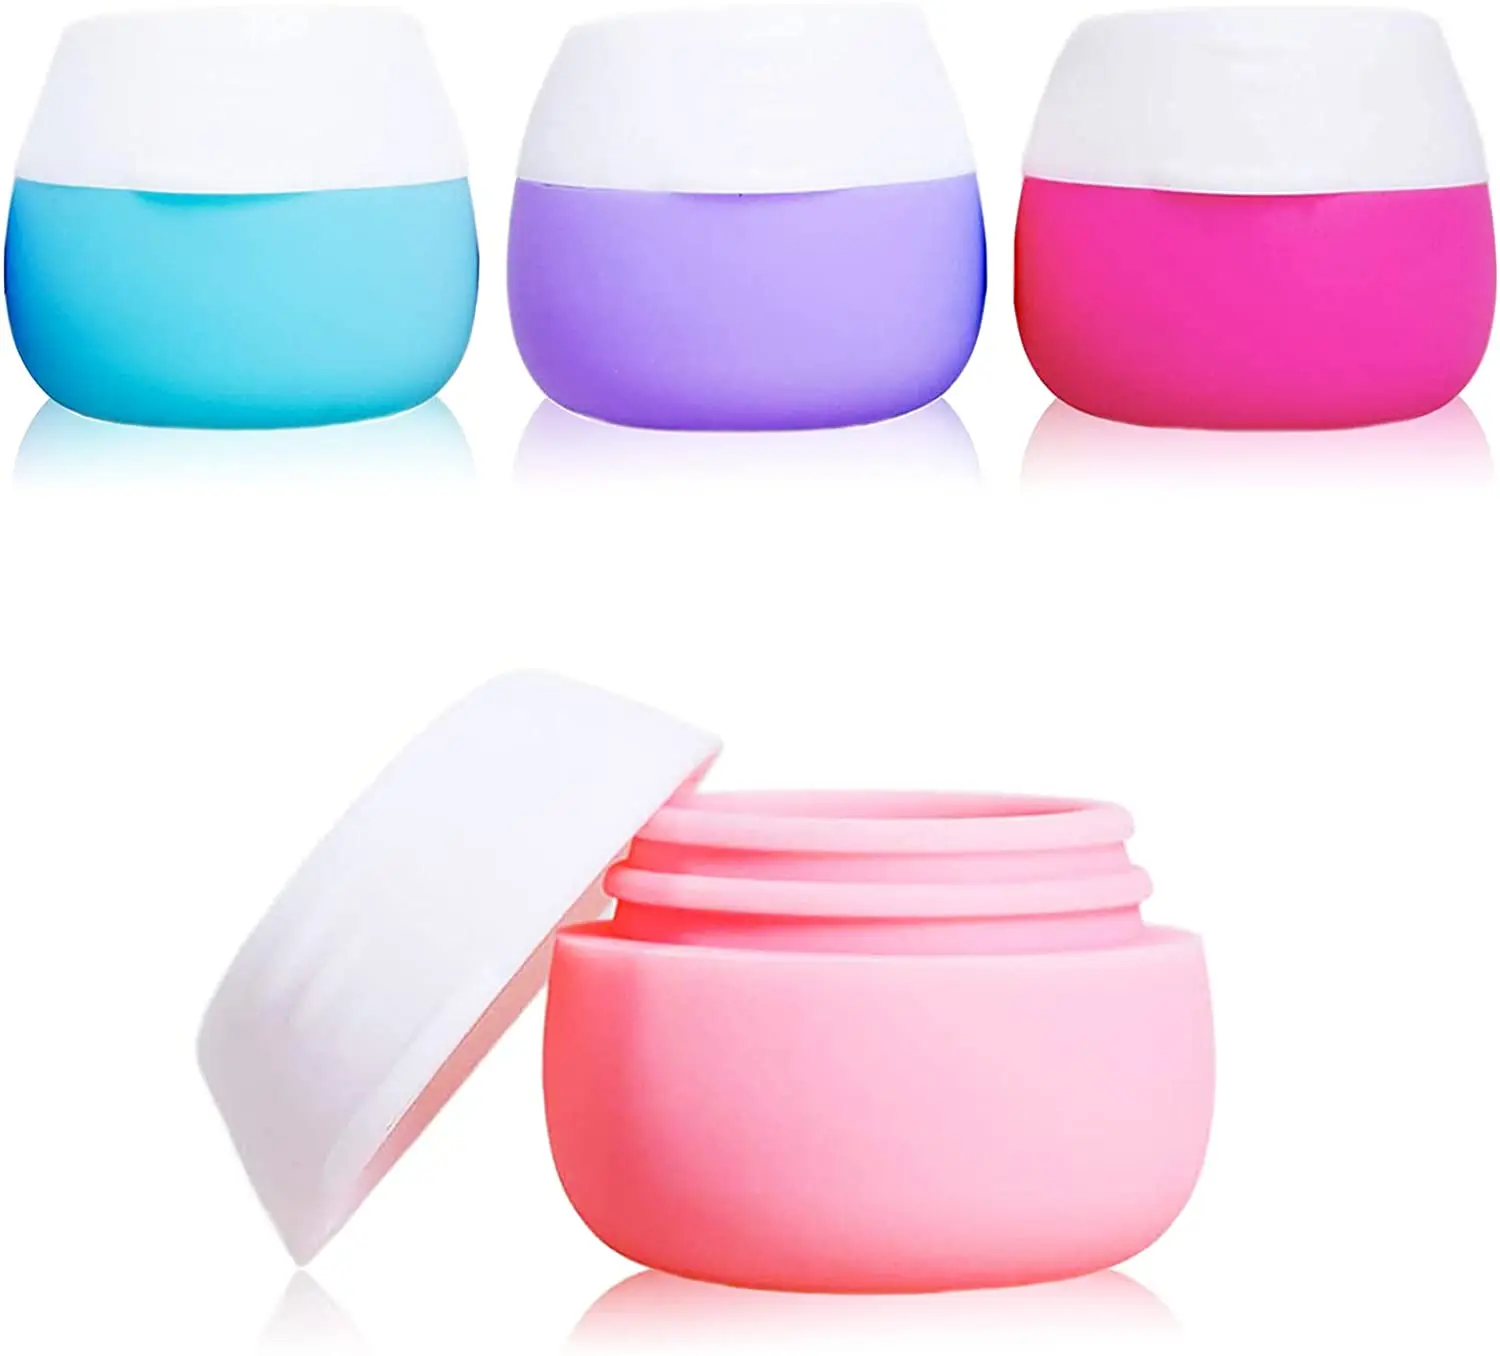 

25g Silicone Cream Jars Refillable Empty Pots Face Cream Bottles Portable Dispenser Leak Proof Travel Containers for Toiletries